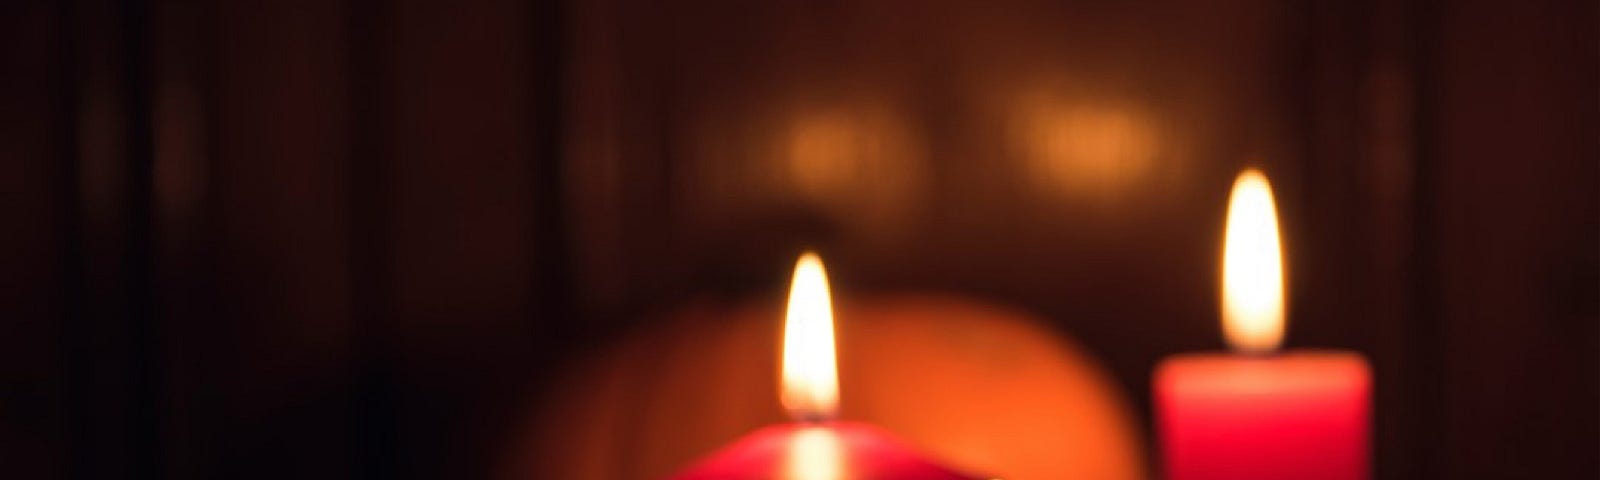 three red candles burning